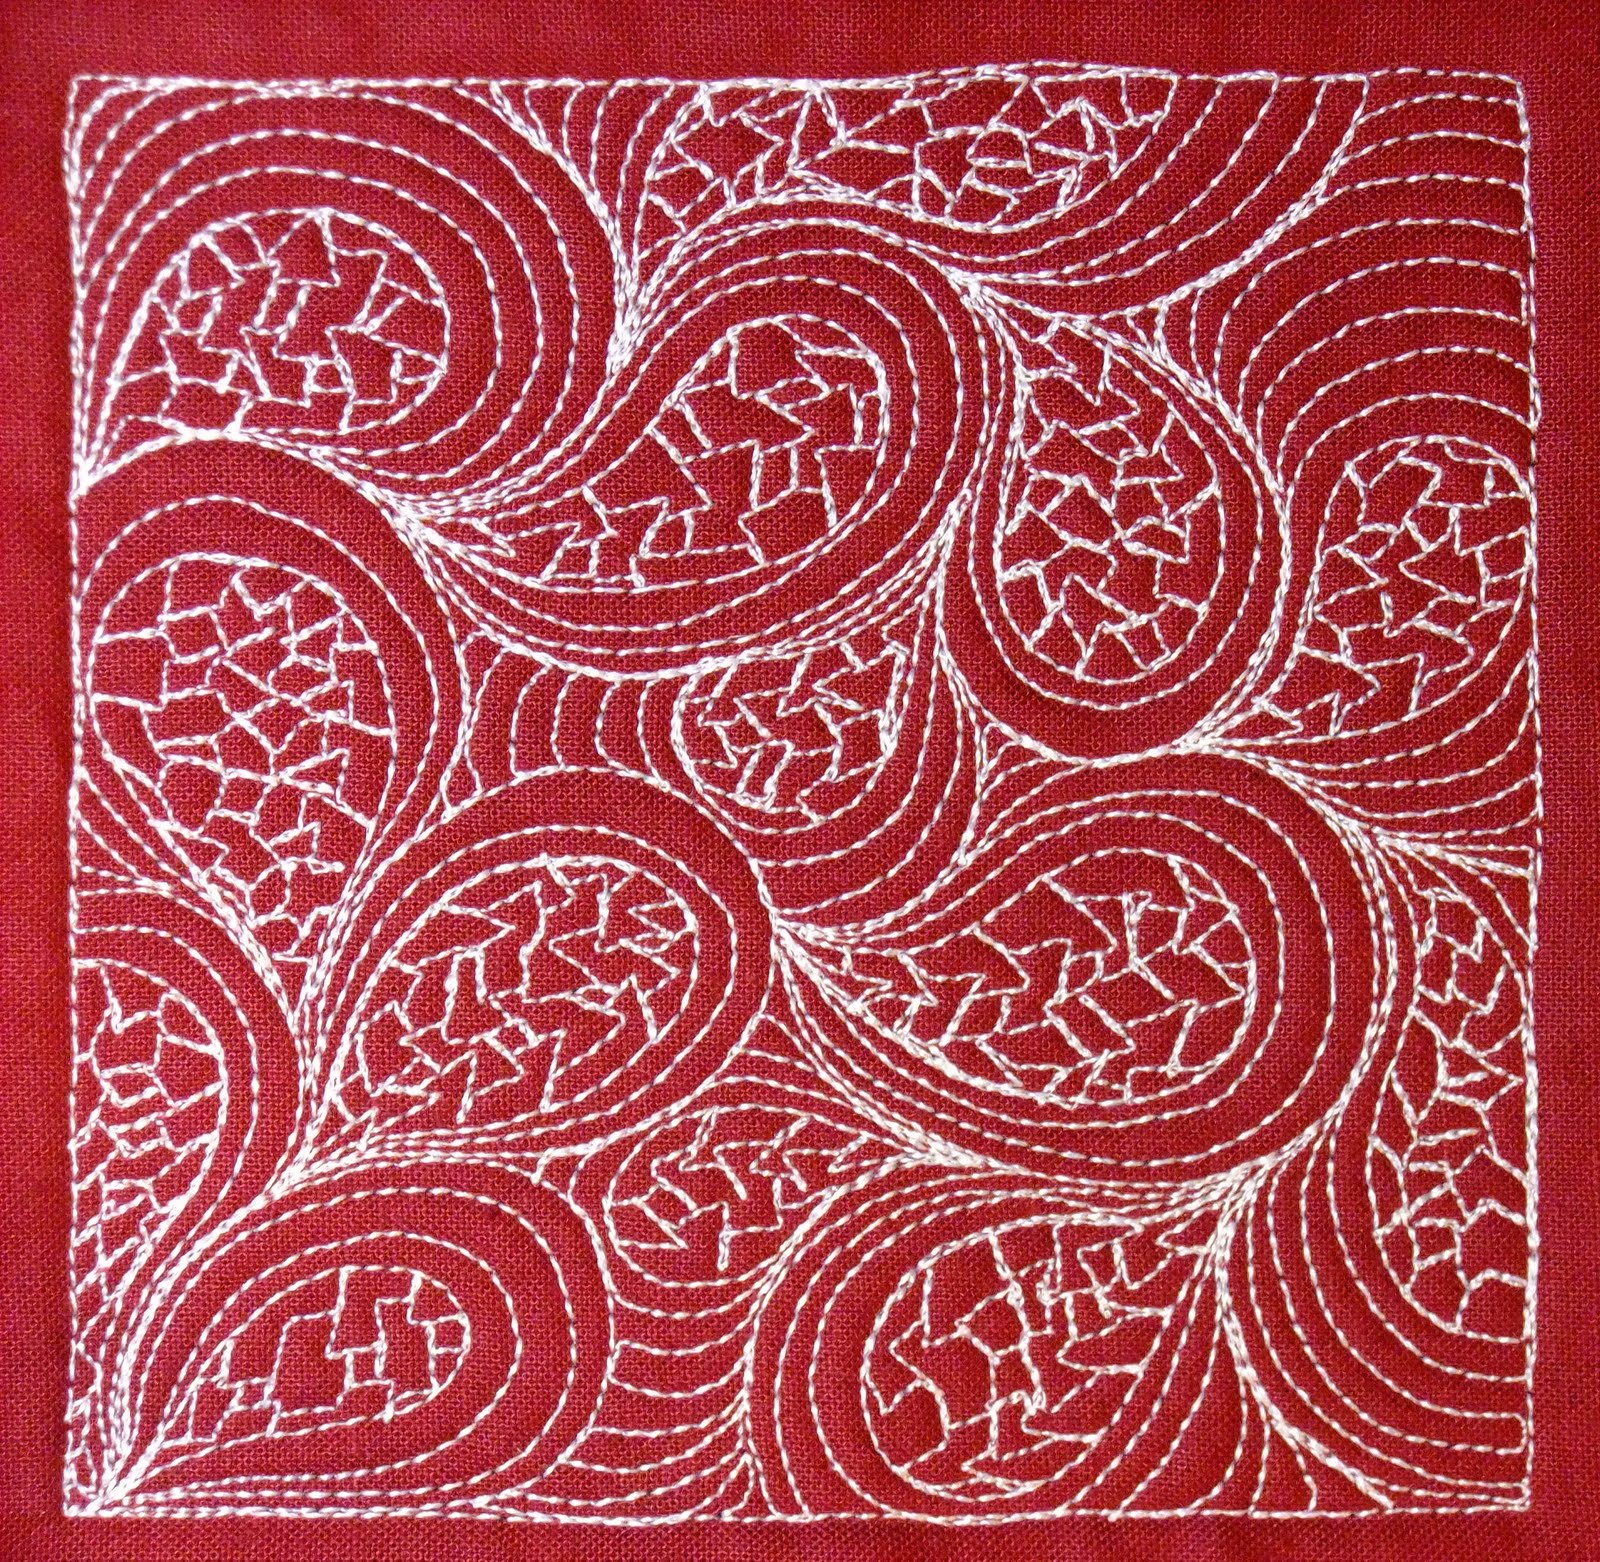 The Free Motion Quilting Project: Day 341 - Cracked Paisley